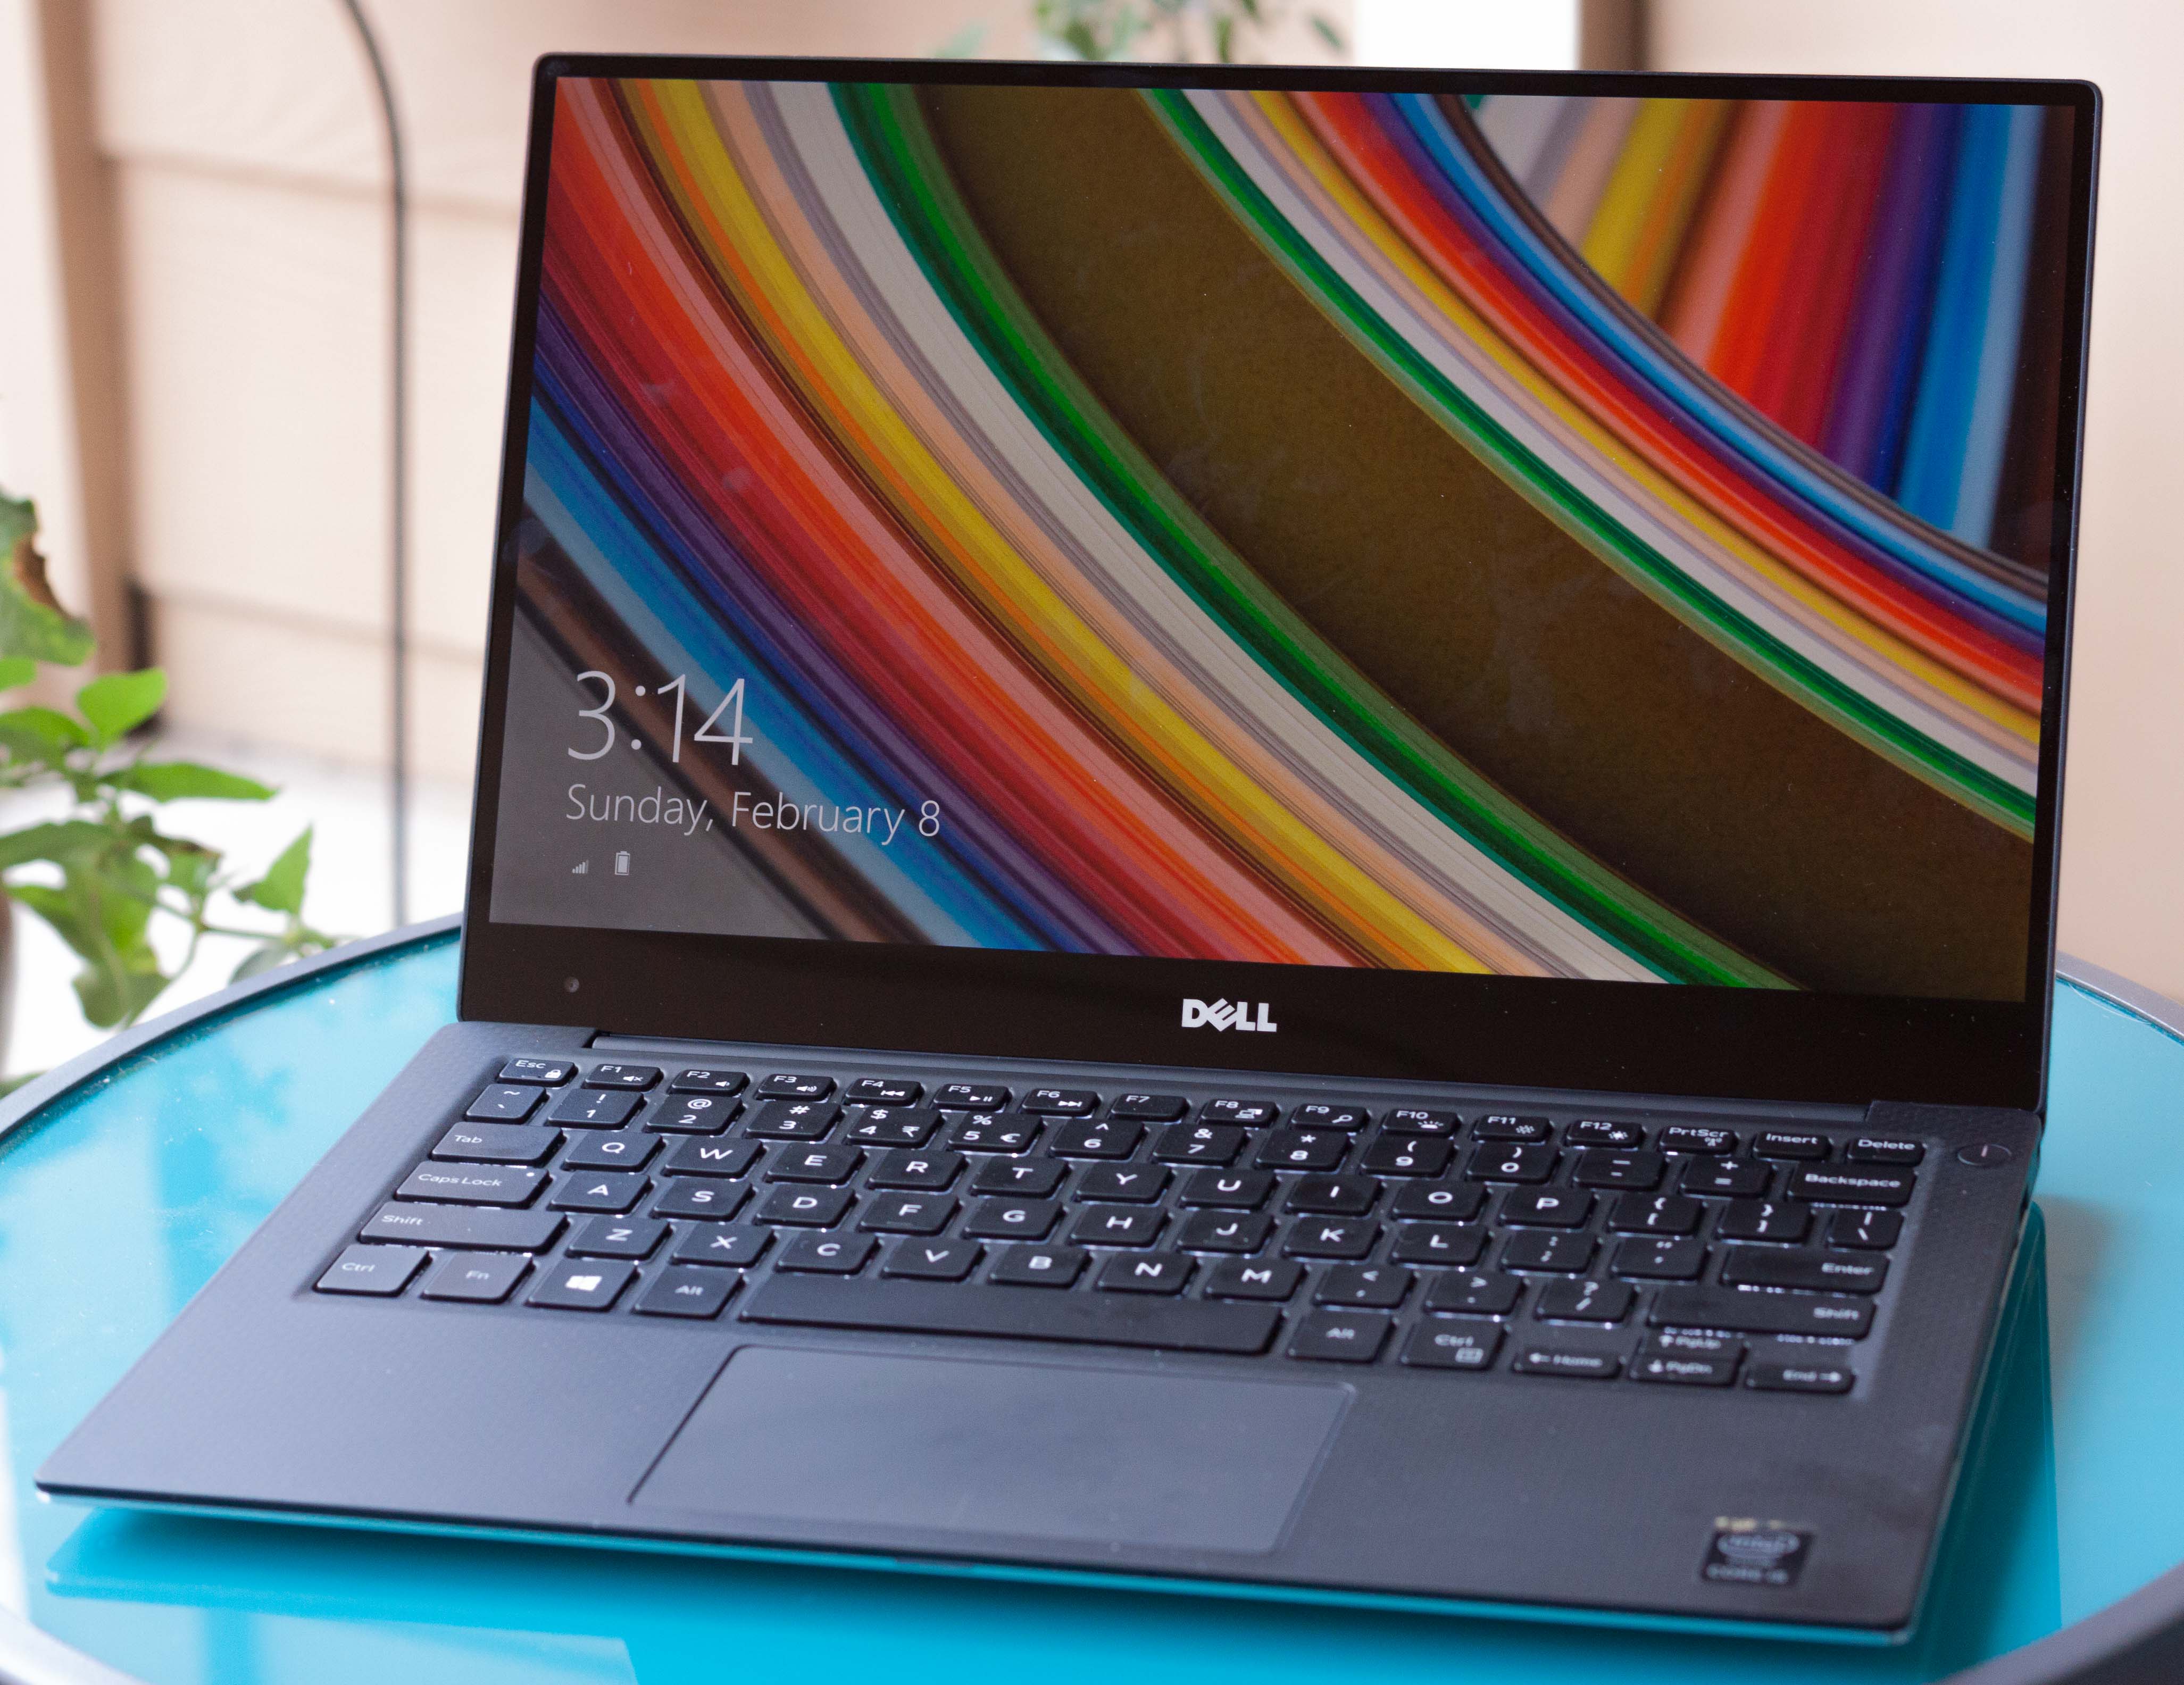 Dell’s XPS 13 - lightweight laptop